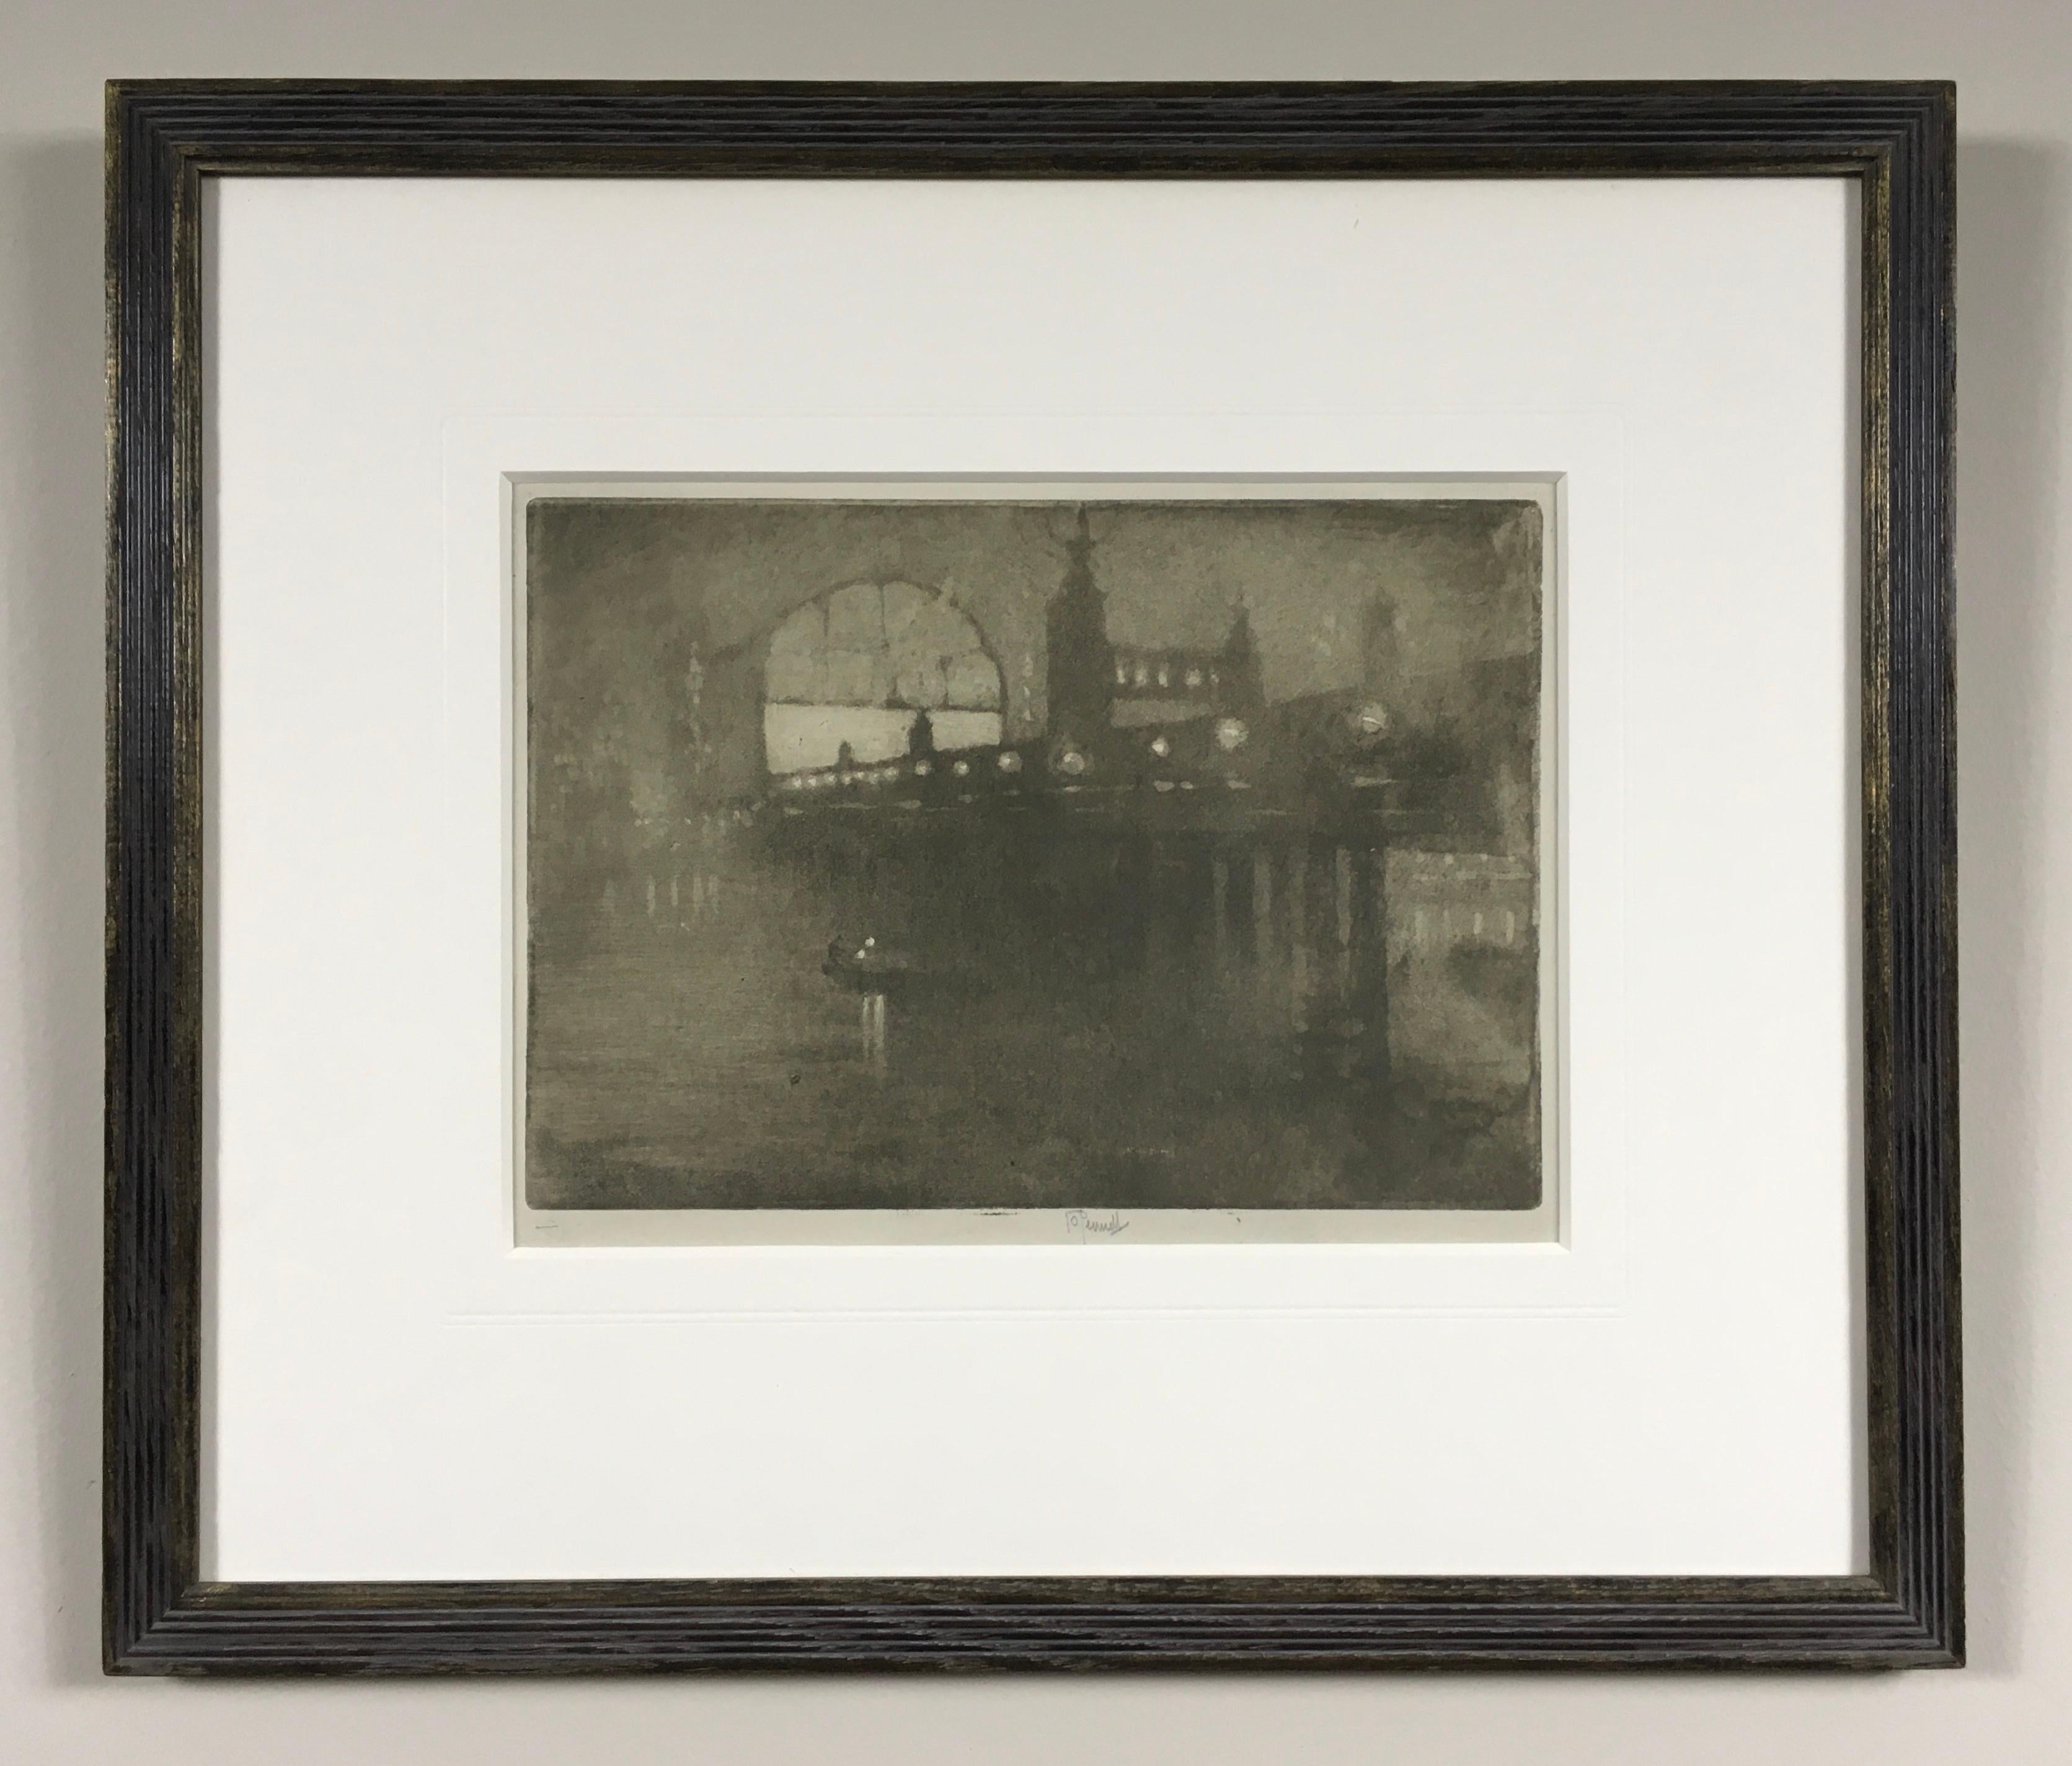 Charing Cross Bridge - 1909 etching of London by Joseph Pennell For Sale 2